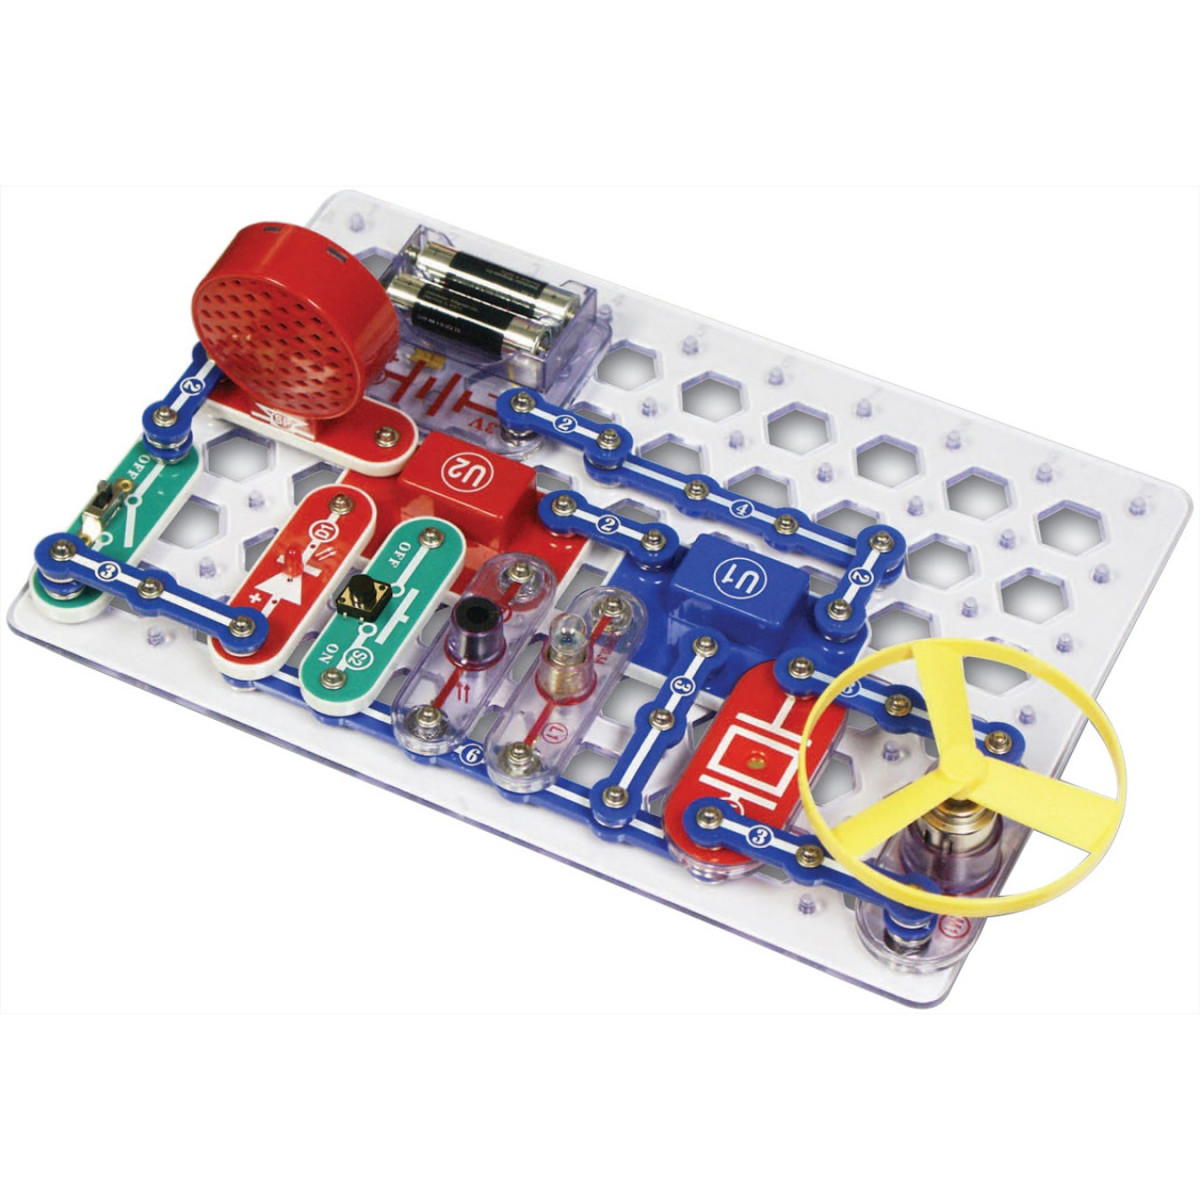 Build your own circuits by snapping together up to 30 parts